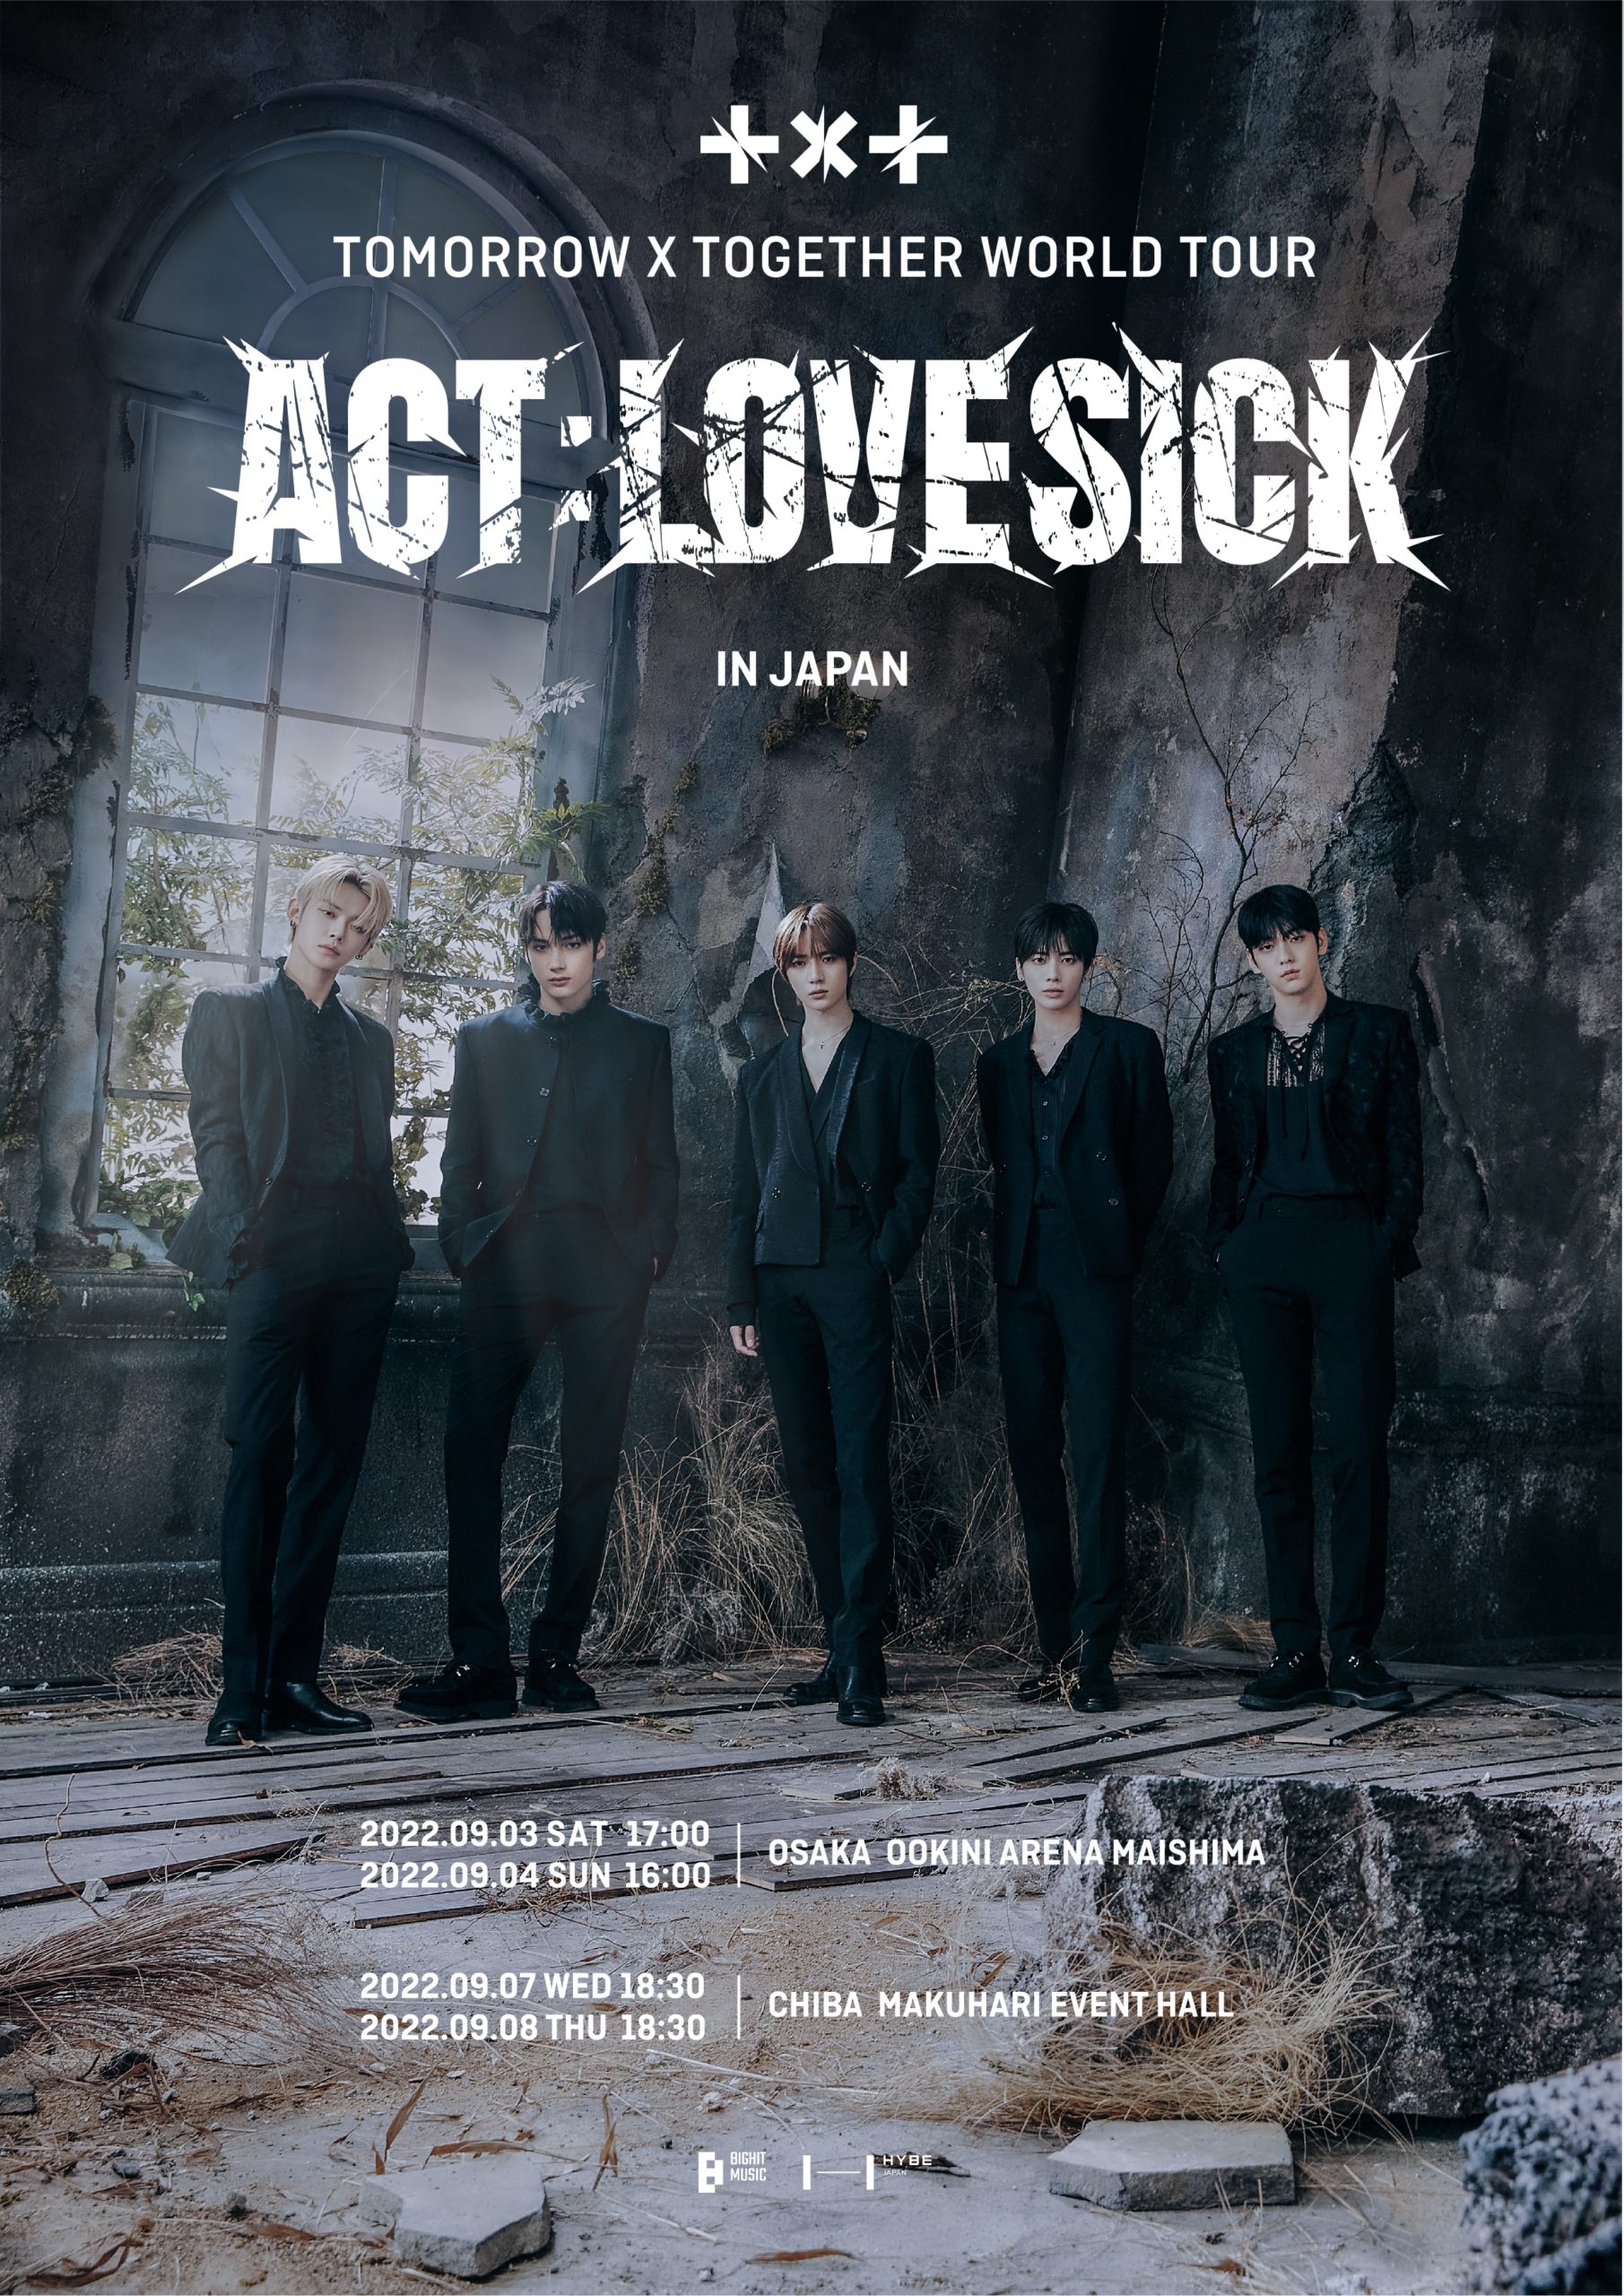 TOMORROW X TOGETHER WORLD TOUR ＜ACT : LOVE SICK＞ IN JAPAN